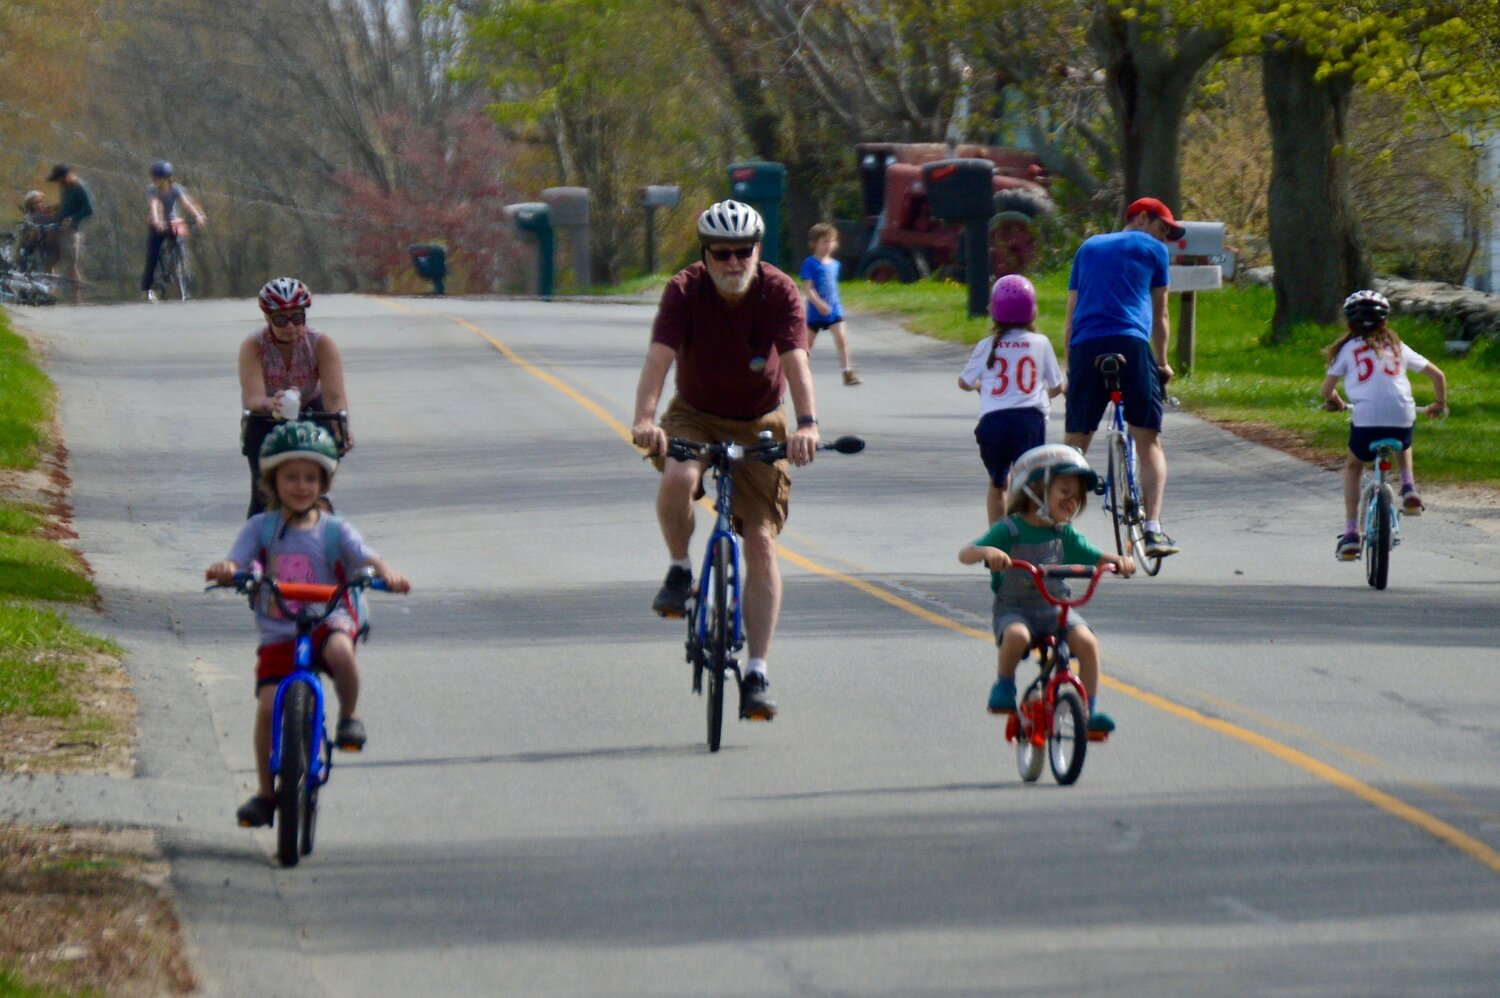 Bike enthusiasts of all ages enjoyed the car-free “Farm-to-Farm” ride held in 2018 on Middle Road. A similar event is taking place in Island Park and beyond this Saturday.